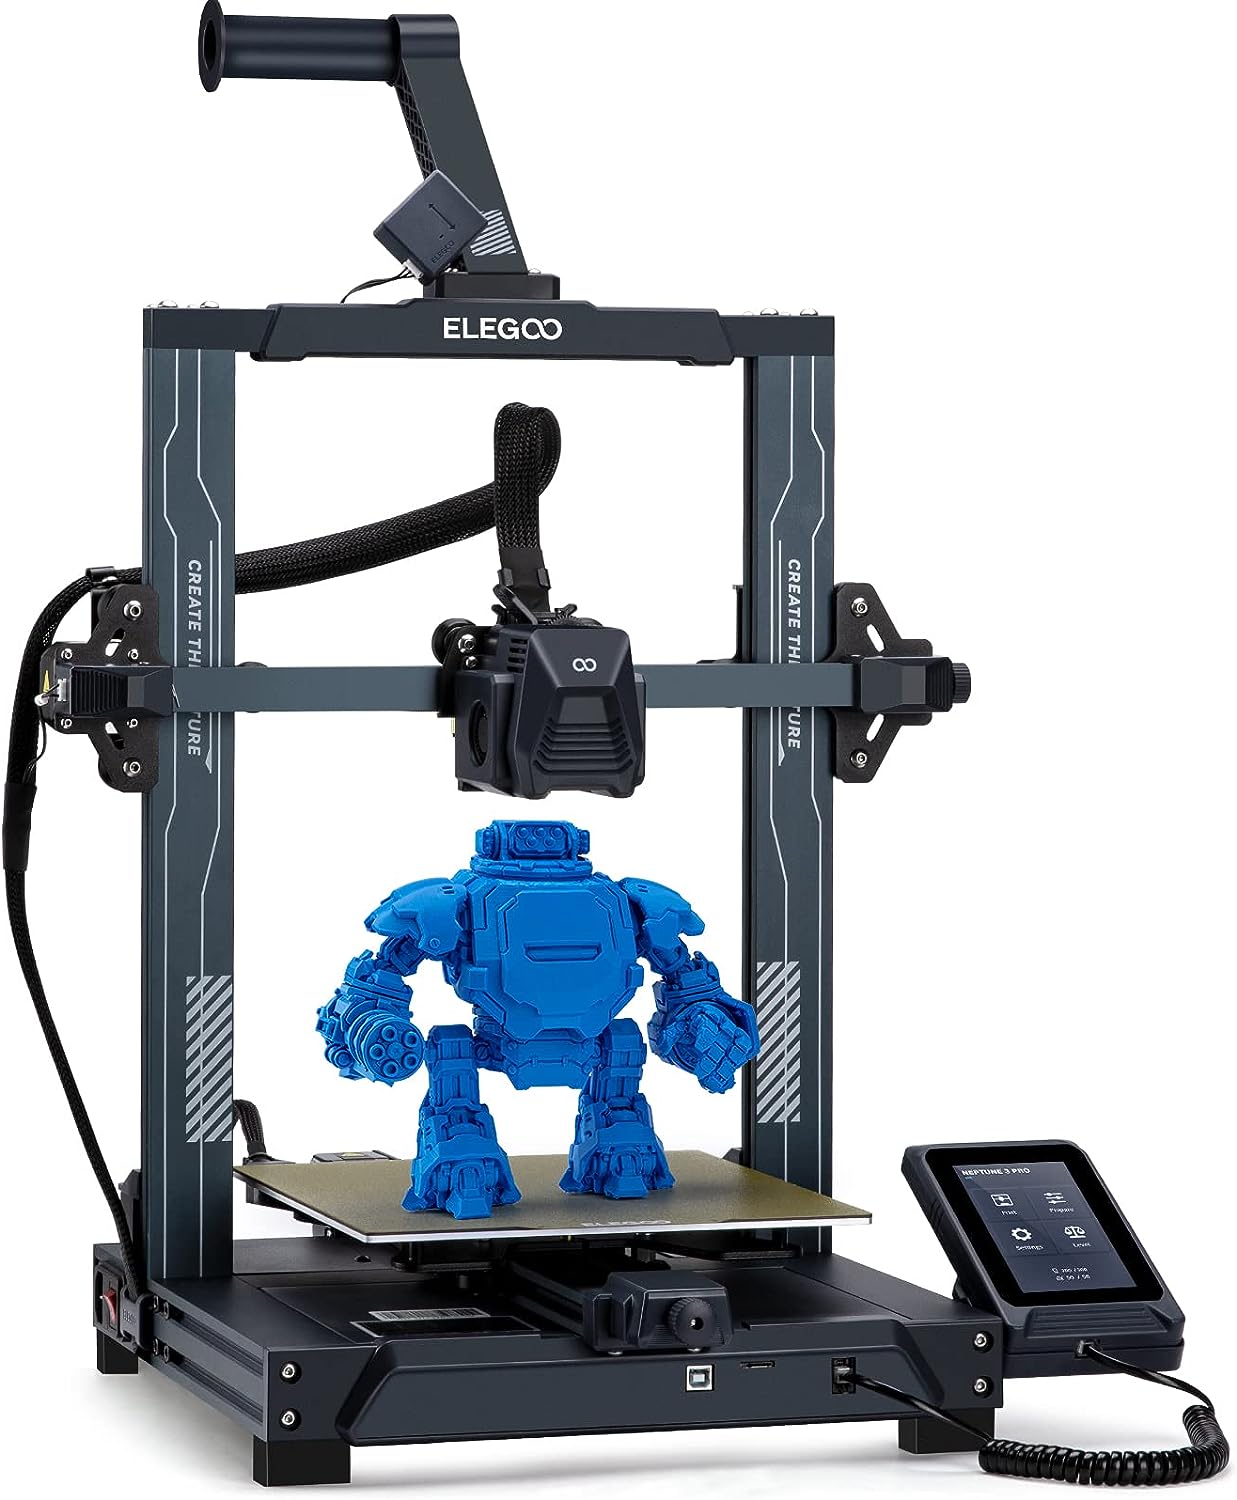 3d printer under 750 detailed review